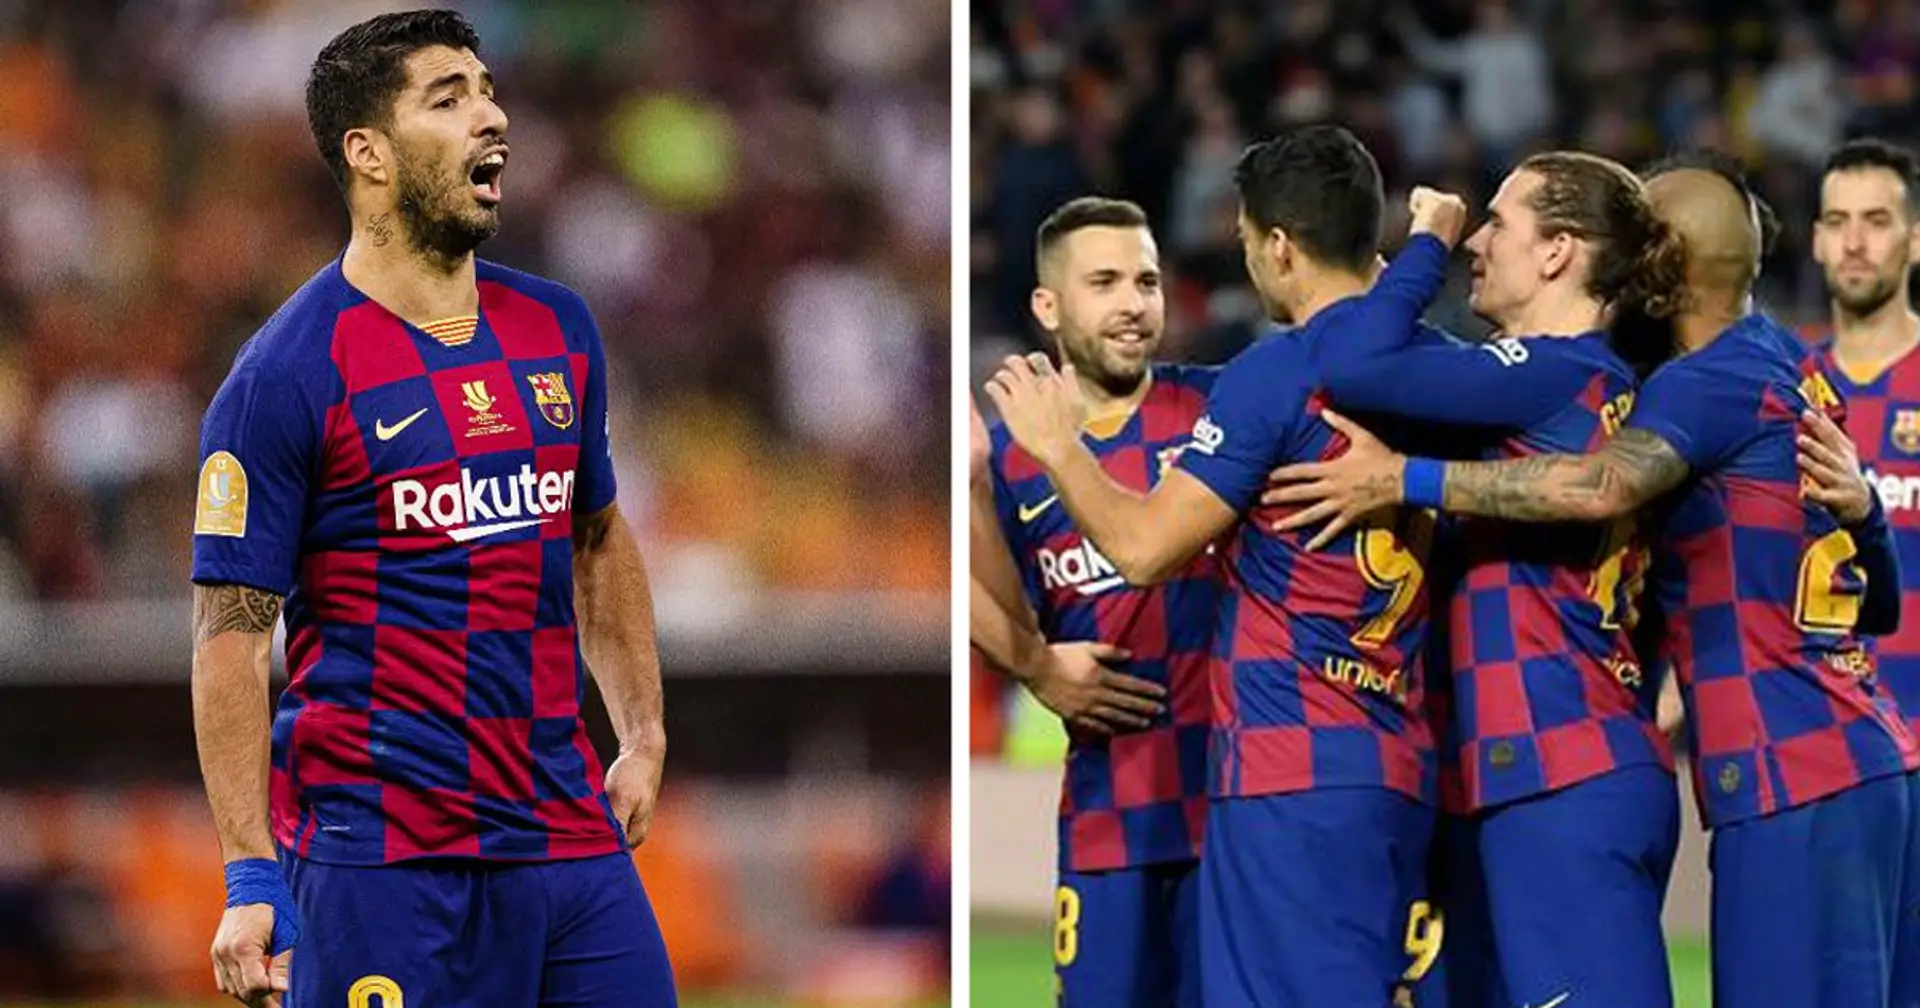 'It hurts': Luis Suarez blasts claims Barca players refused salary cut